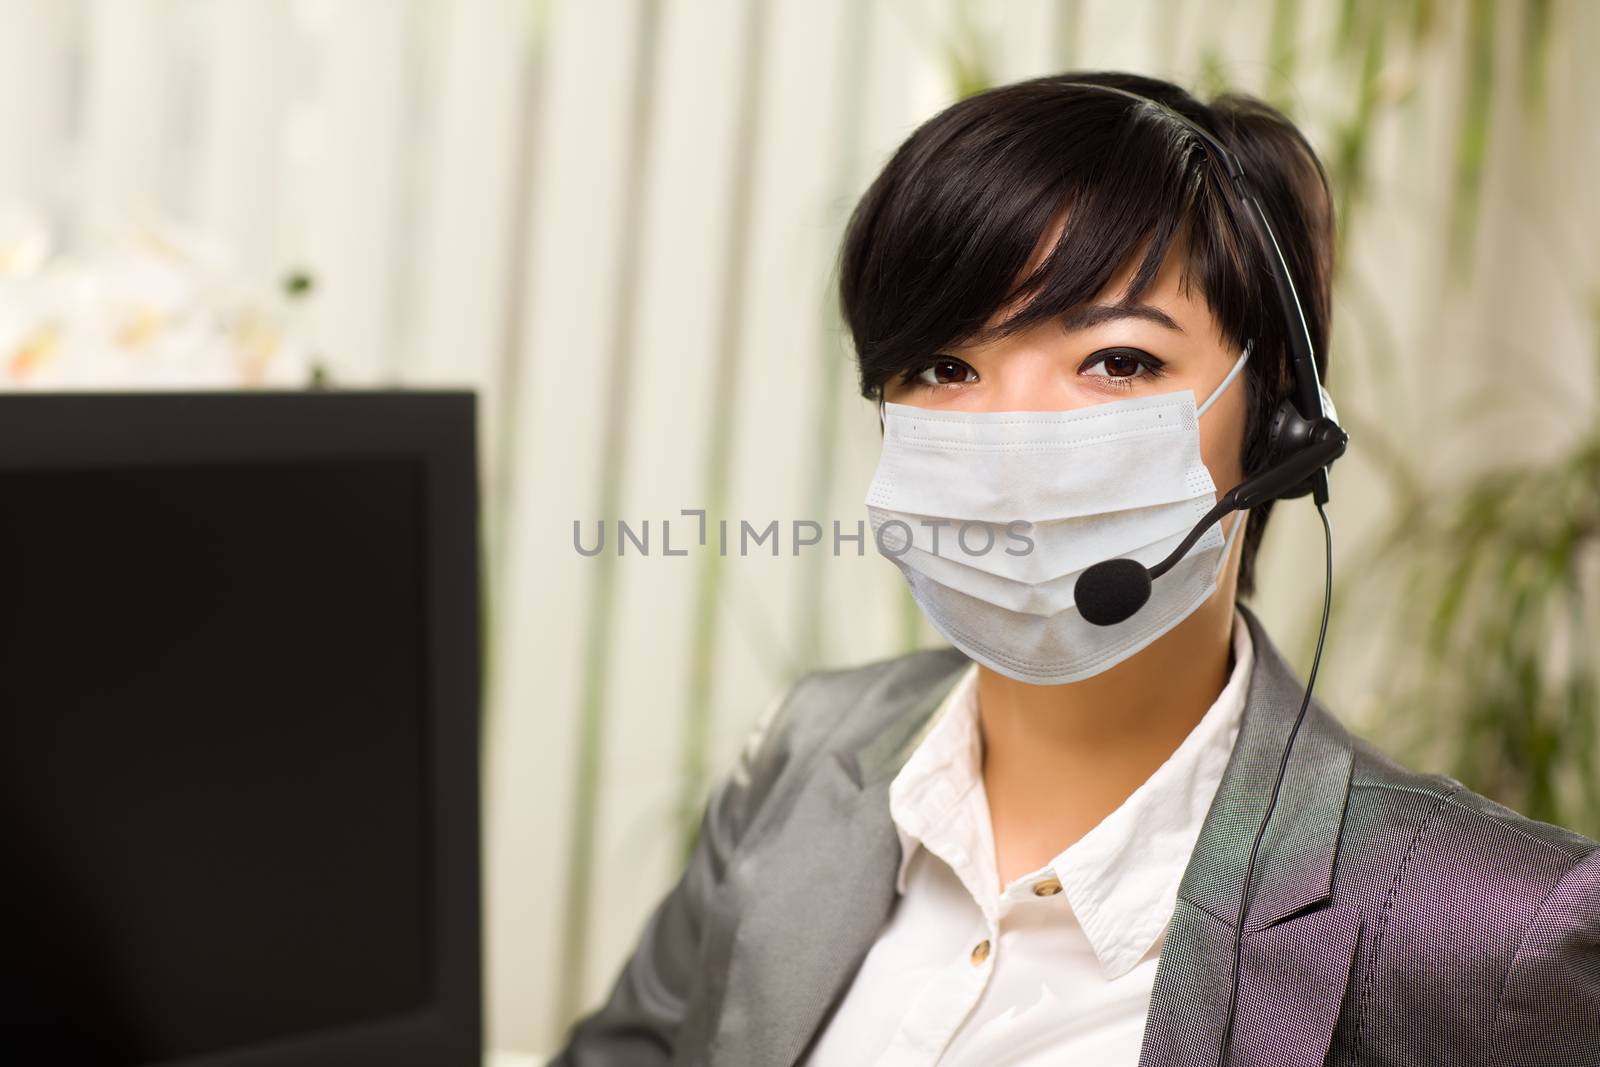 Woman At Office Desk Wearing Medical Face Mask by Feverpitched